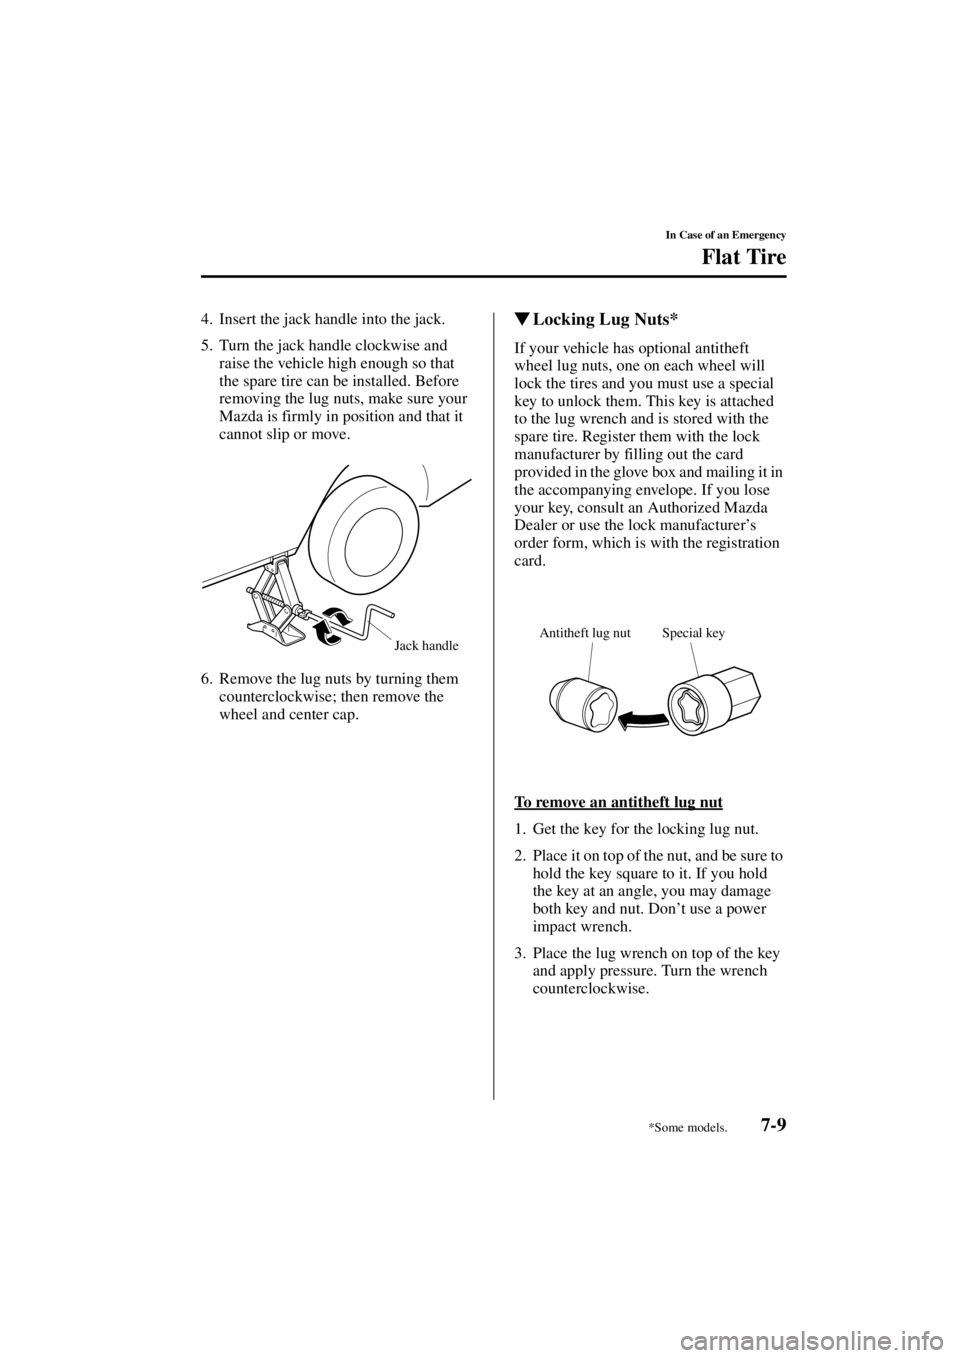 MAZDA MODEL 3 5-DOOR 2004  Owners Manual 7-9
In Case of an Emergency
Flat Tire
Form No. 8S18-EA-03I
4. Insert the jack handle into the jack.
5. Turn the jack handle clockwise and raise the vehicle high enough so that 
the spare tire can be i